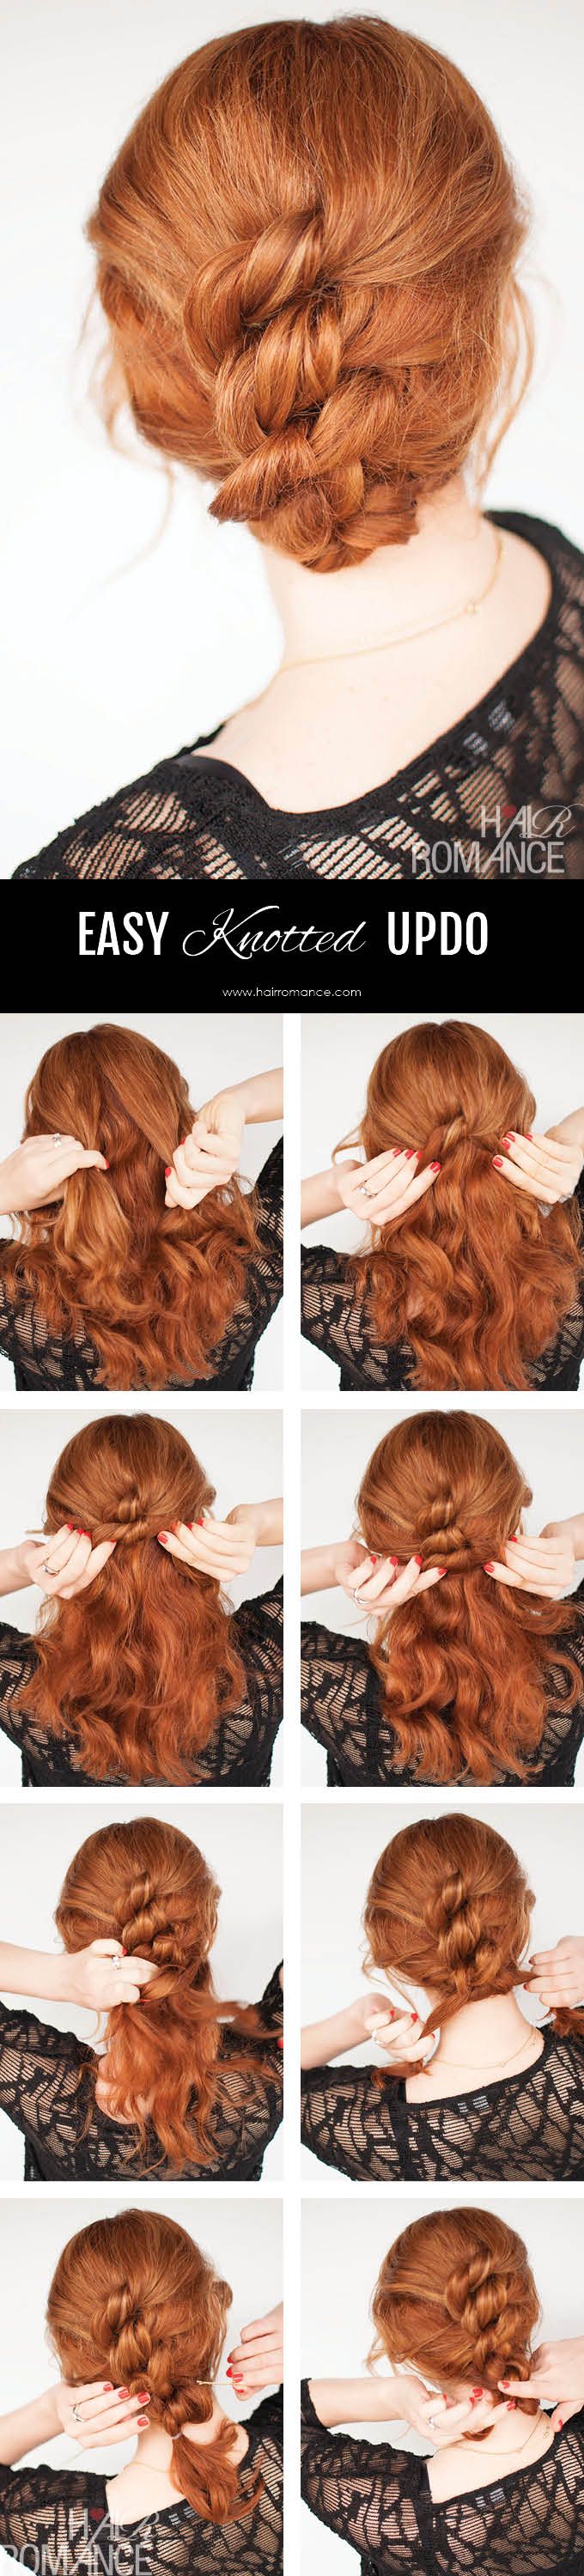 Knotted Updo Hairstyle Tutorial